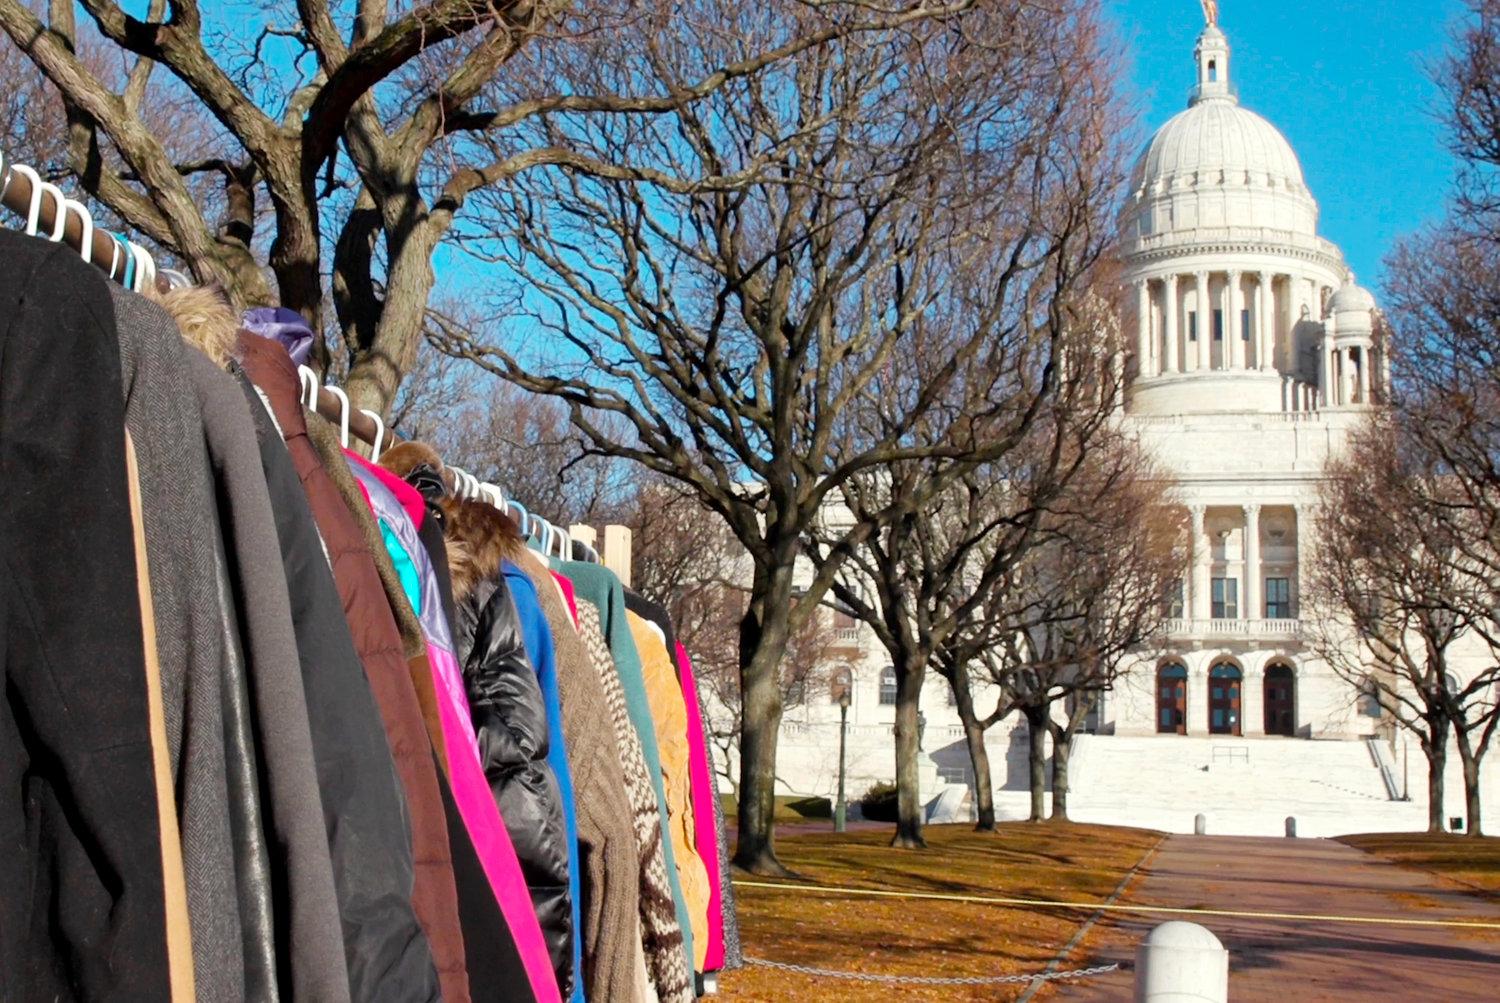 The Buy Nothing Day Coat Exchange takes place on the State House lawn November 26